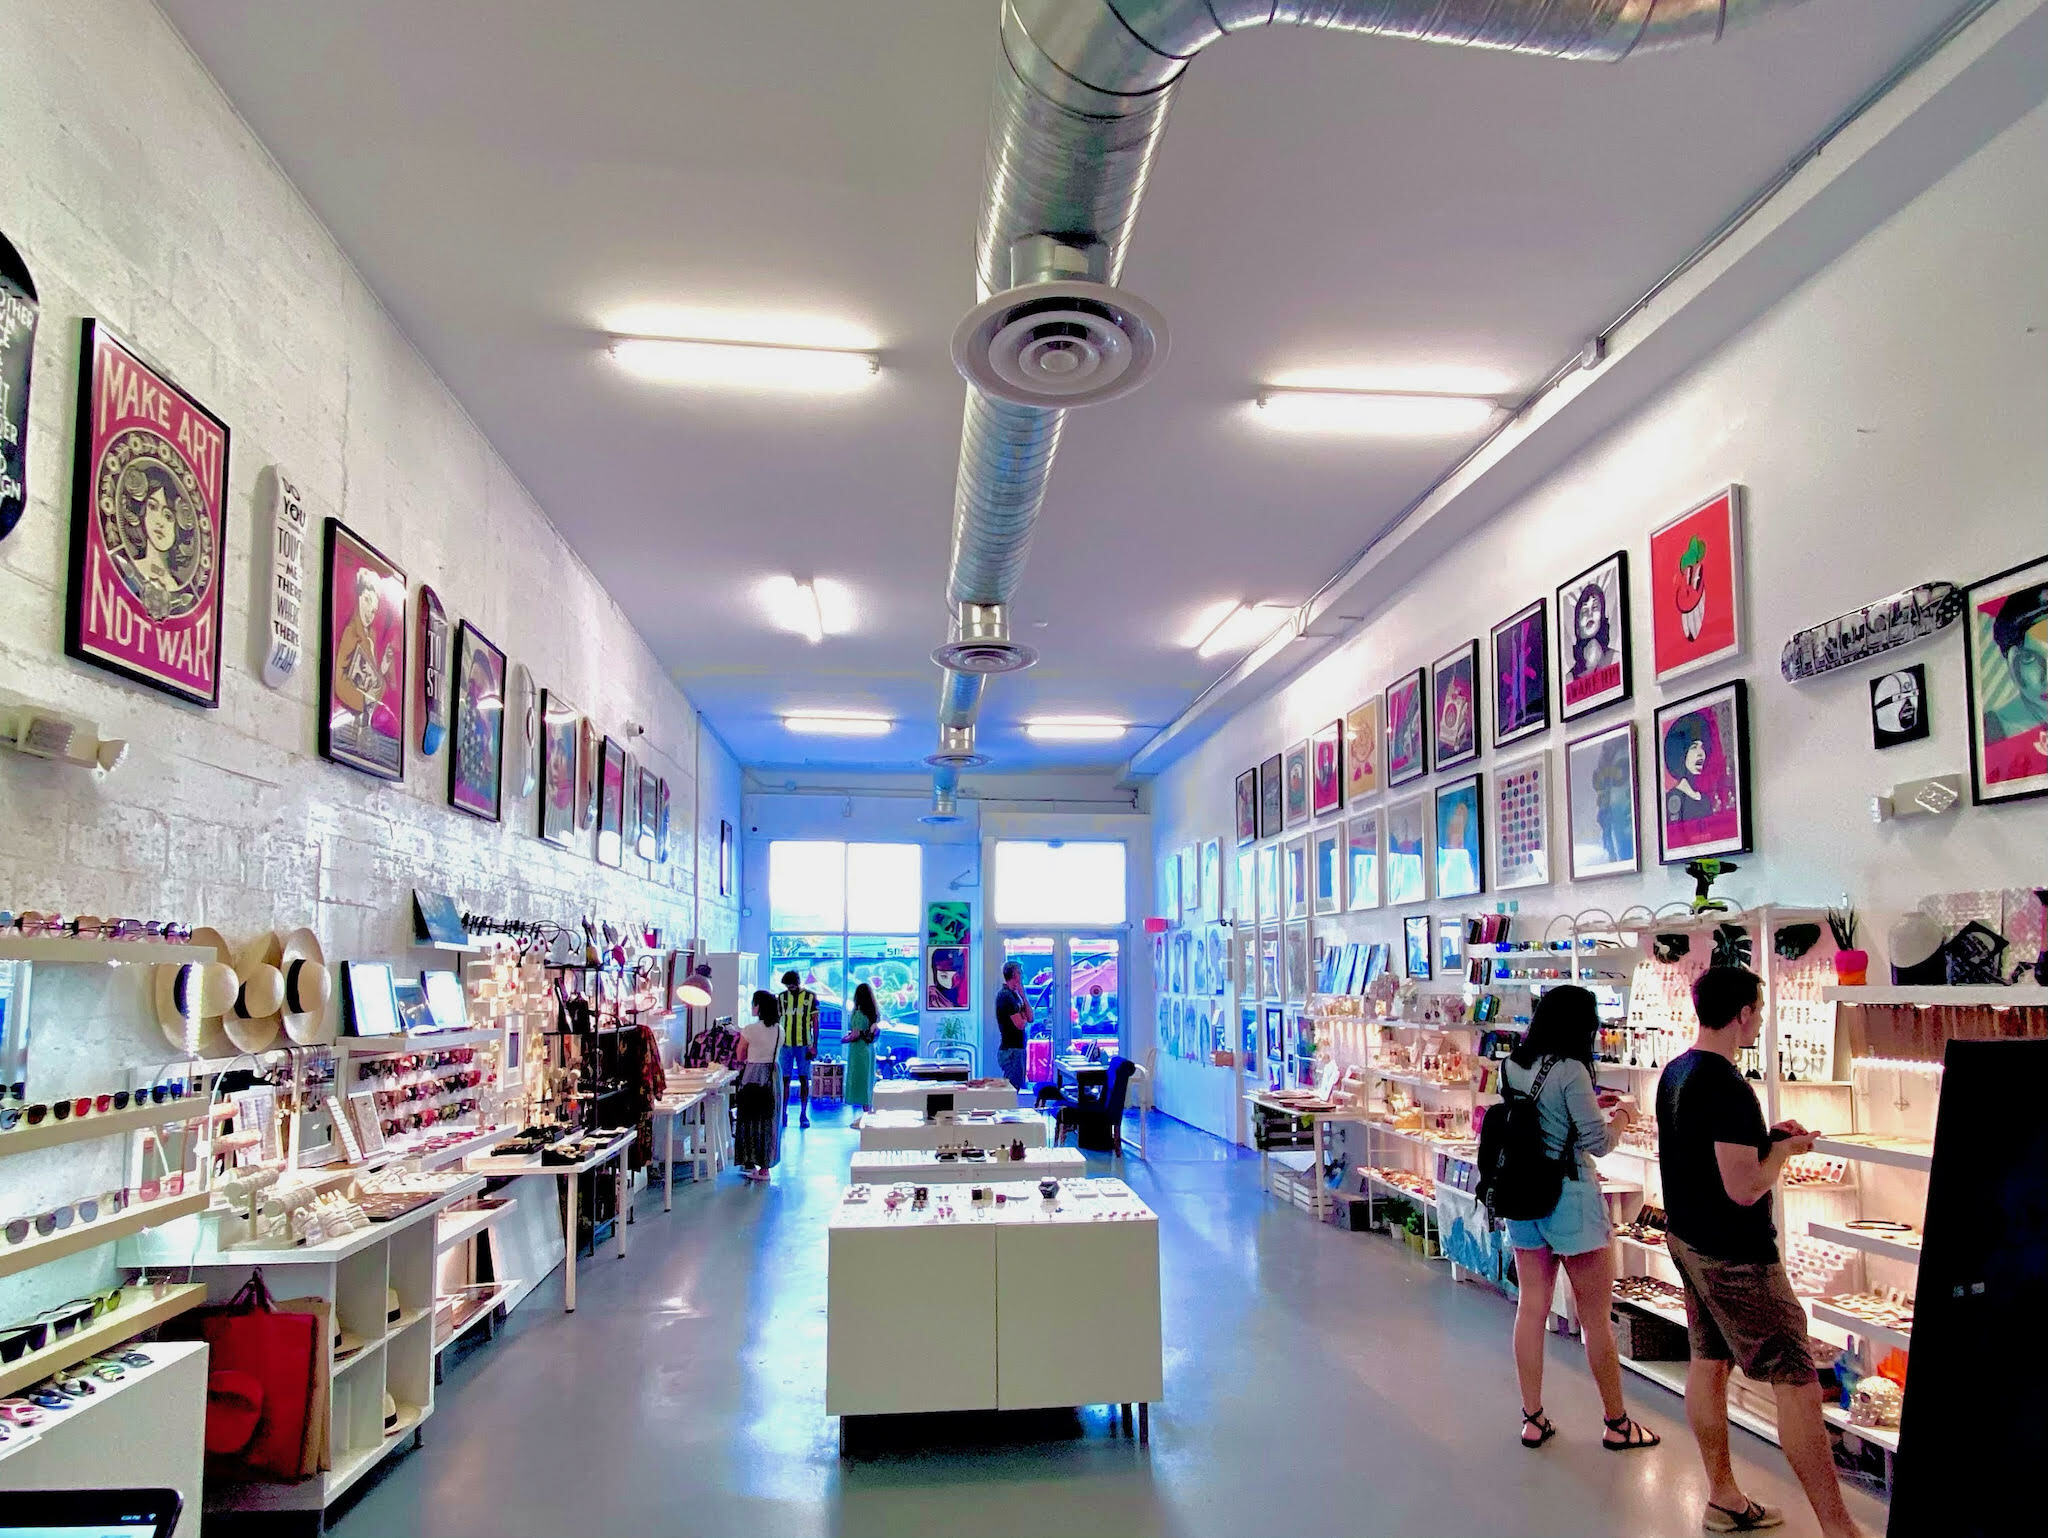 10 Best Places to Go Shopping in Miami - Where to Shop and What to